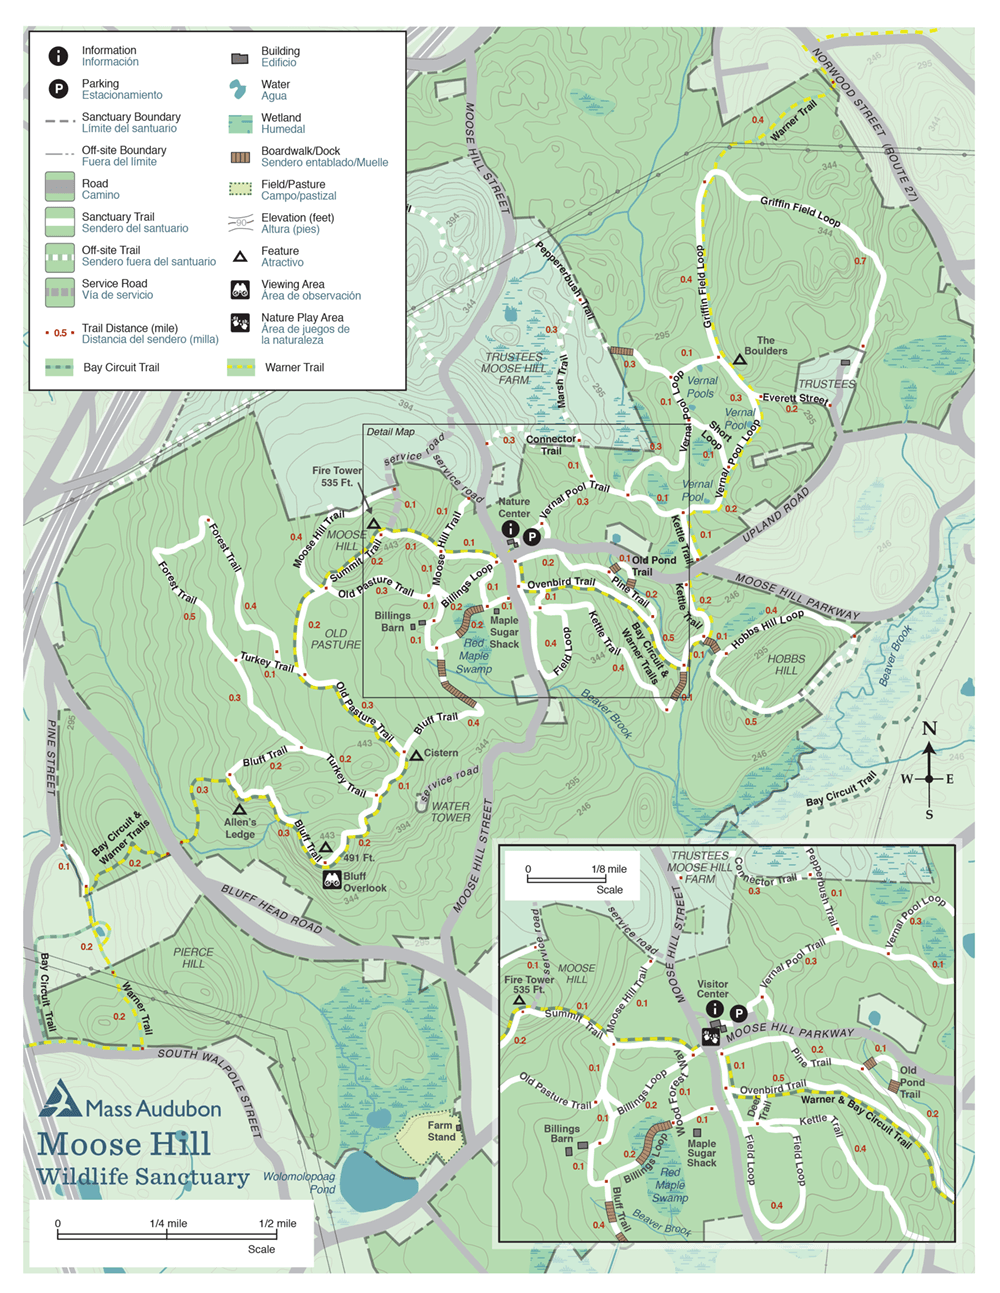 Moose Hill trail map in full color